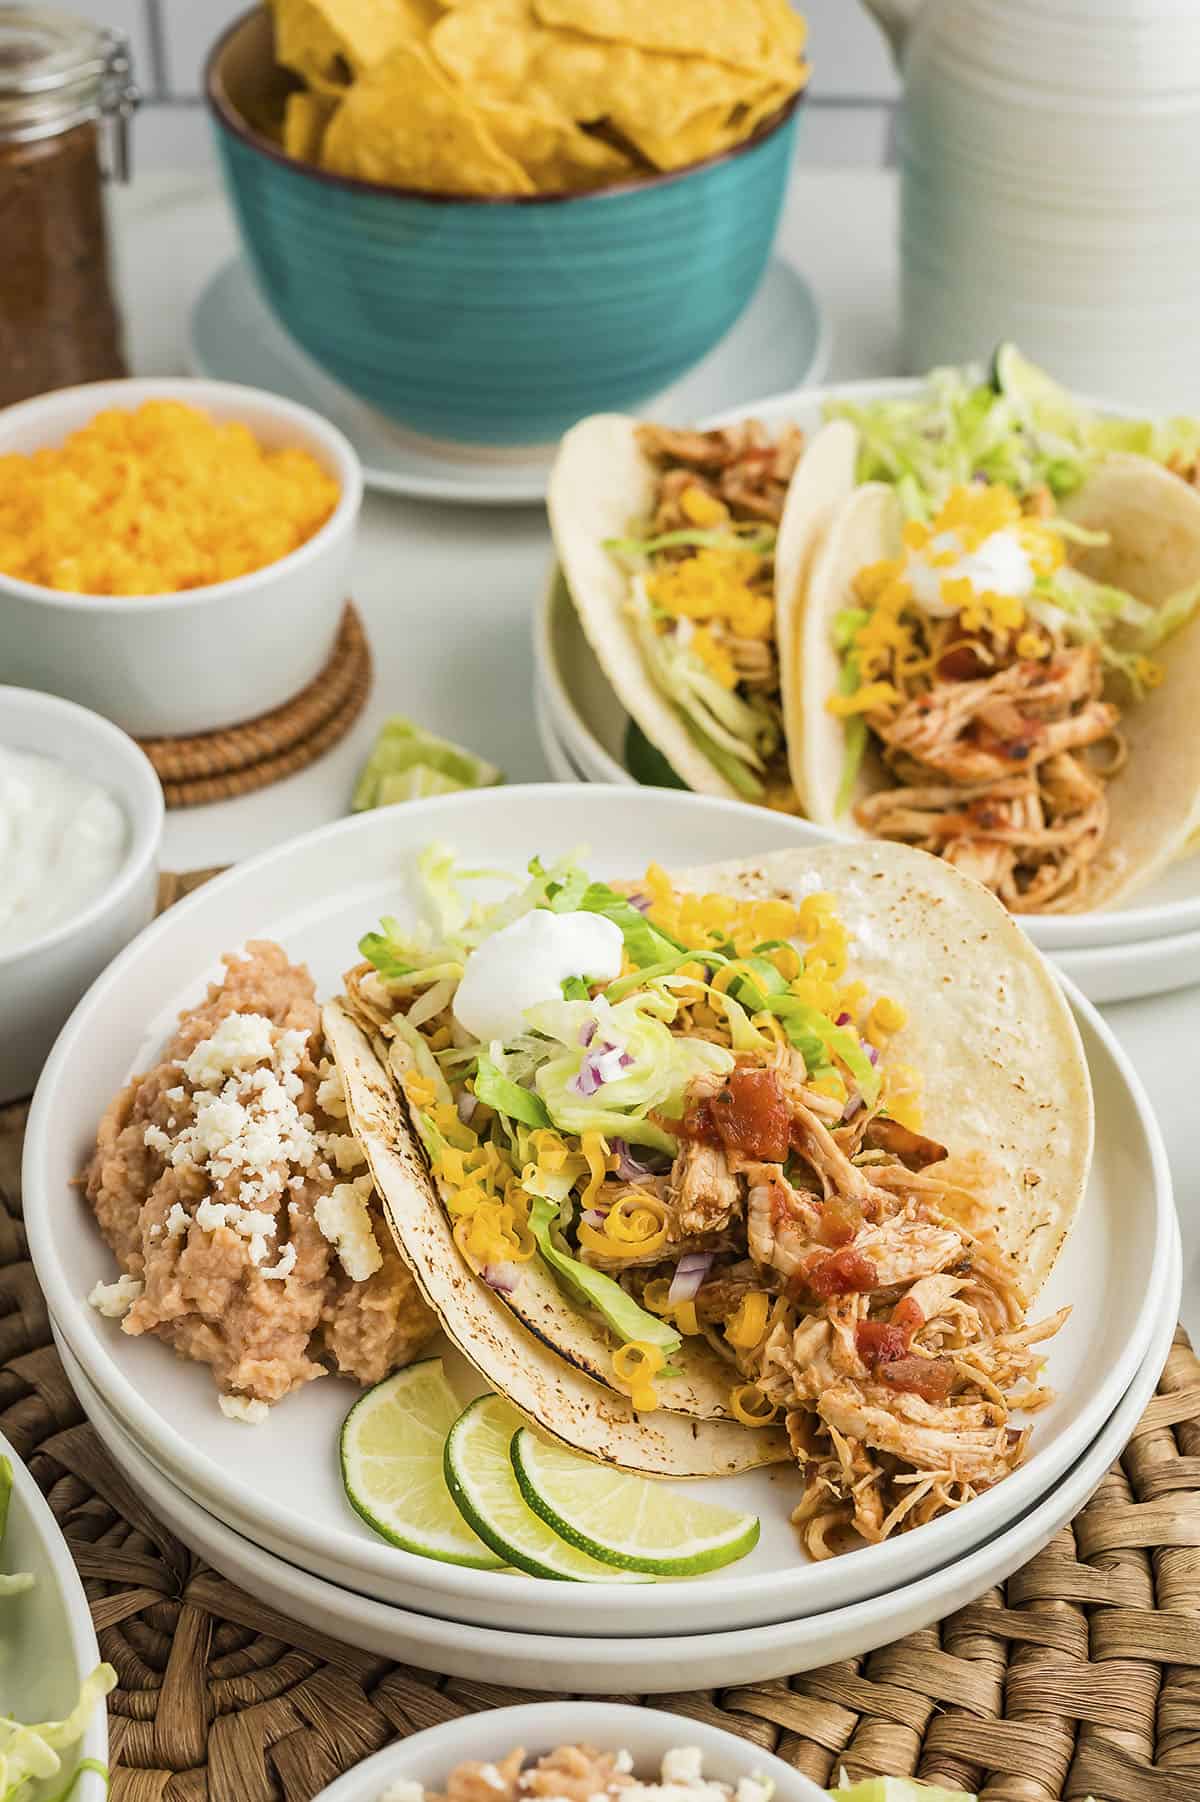 Shredded chicken taco on small plate.